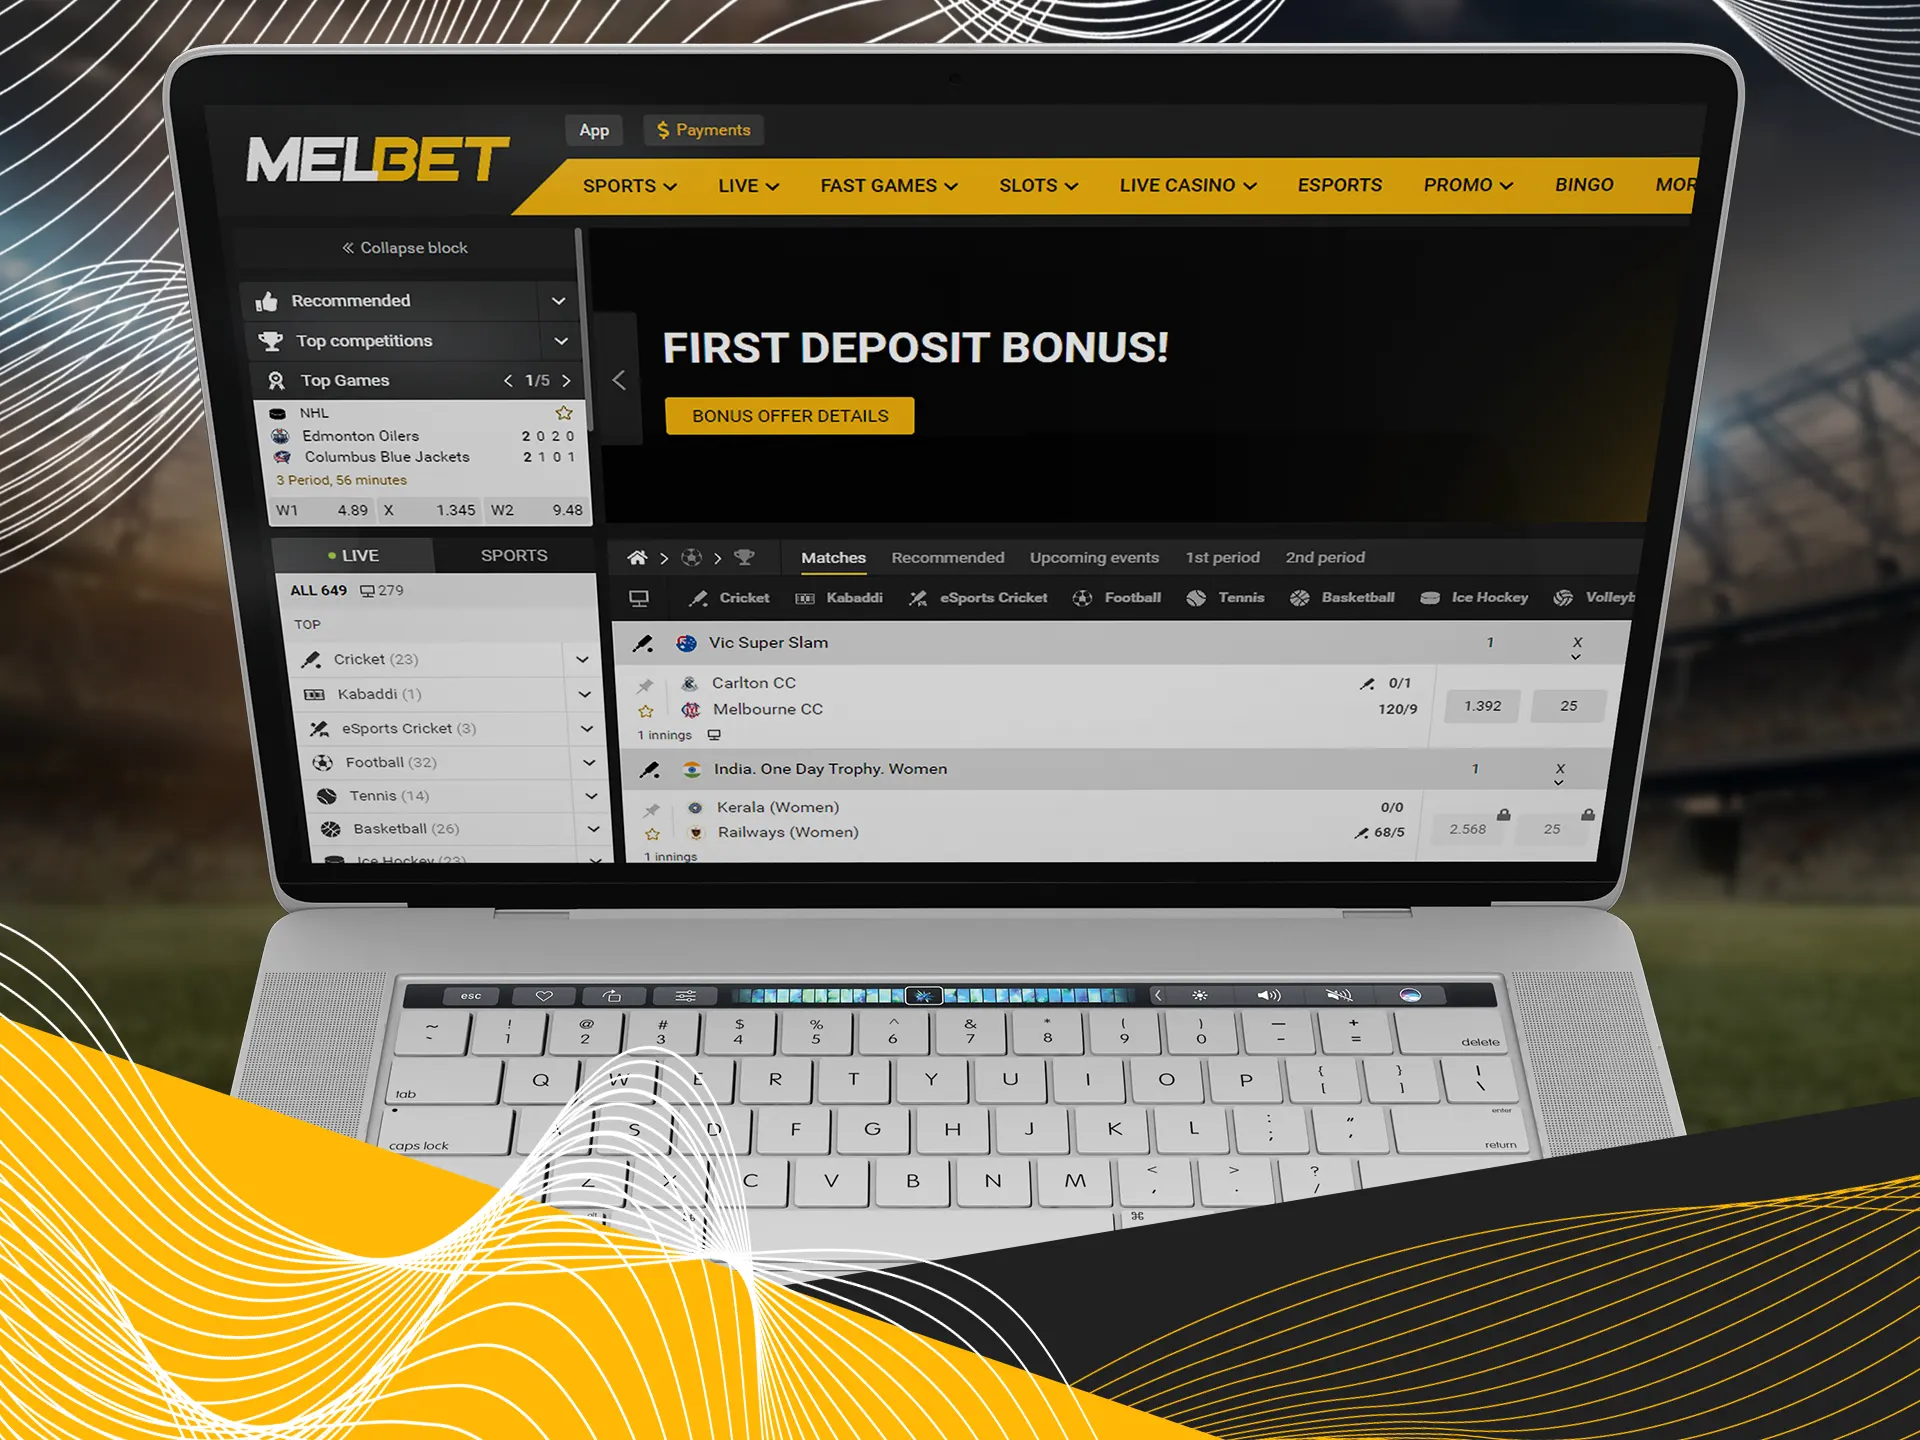 Visit Melbet website using any device with internet connection.